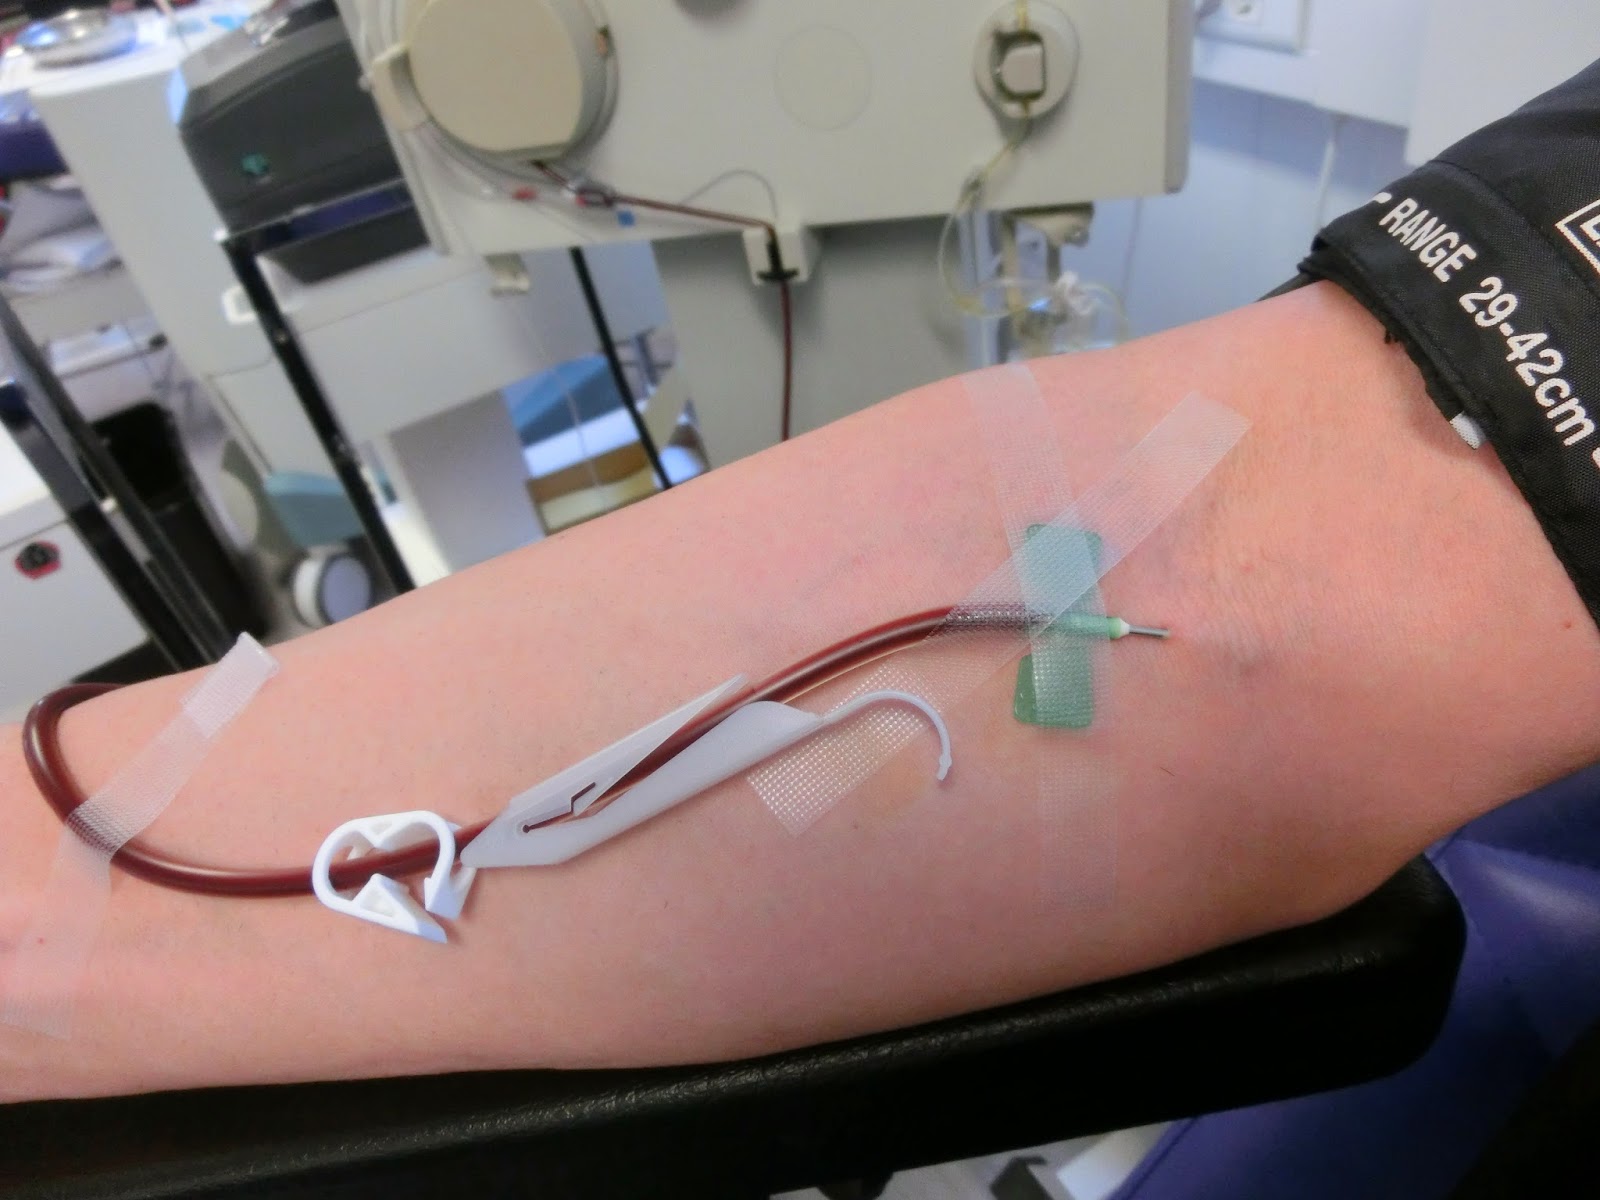 What are the restrictions on donating blood plasma?